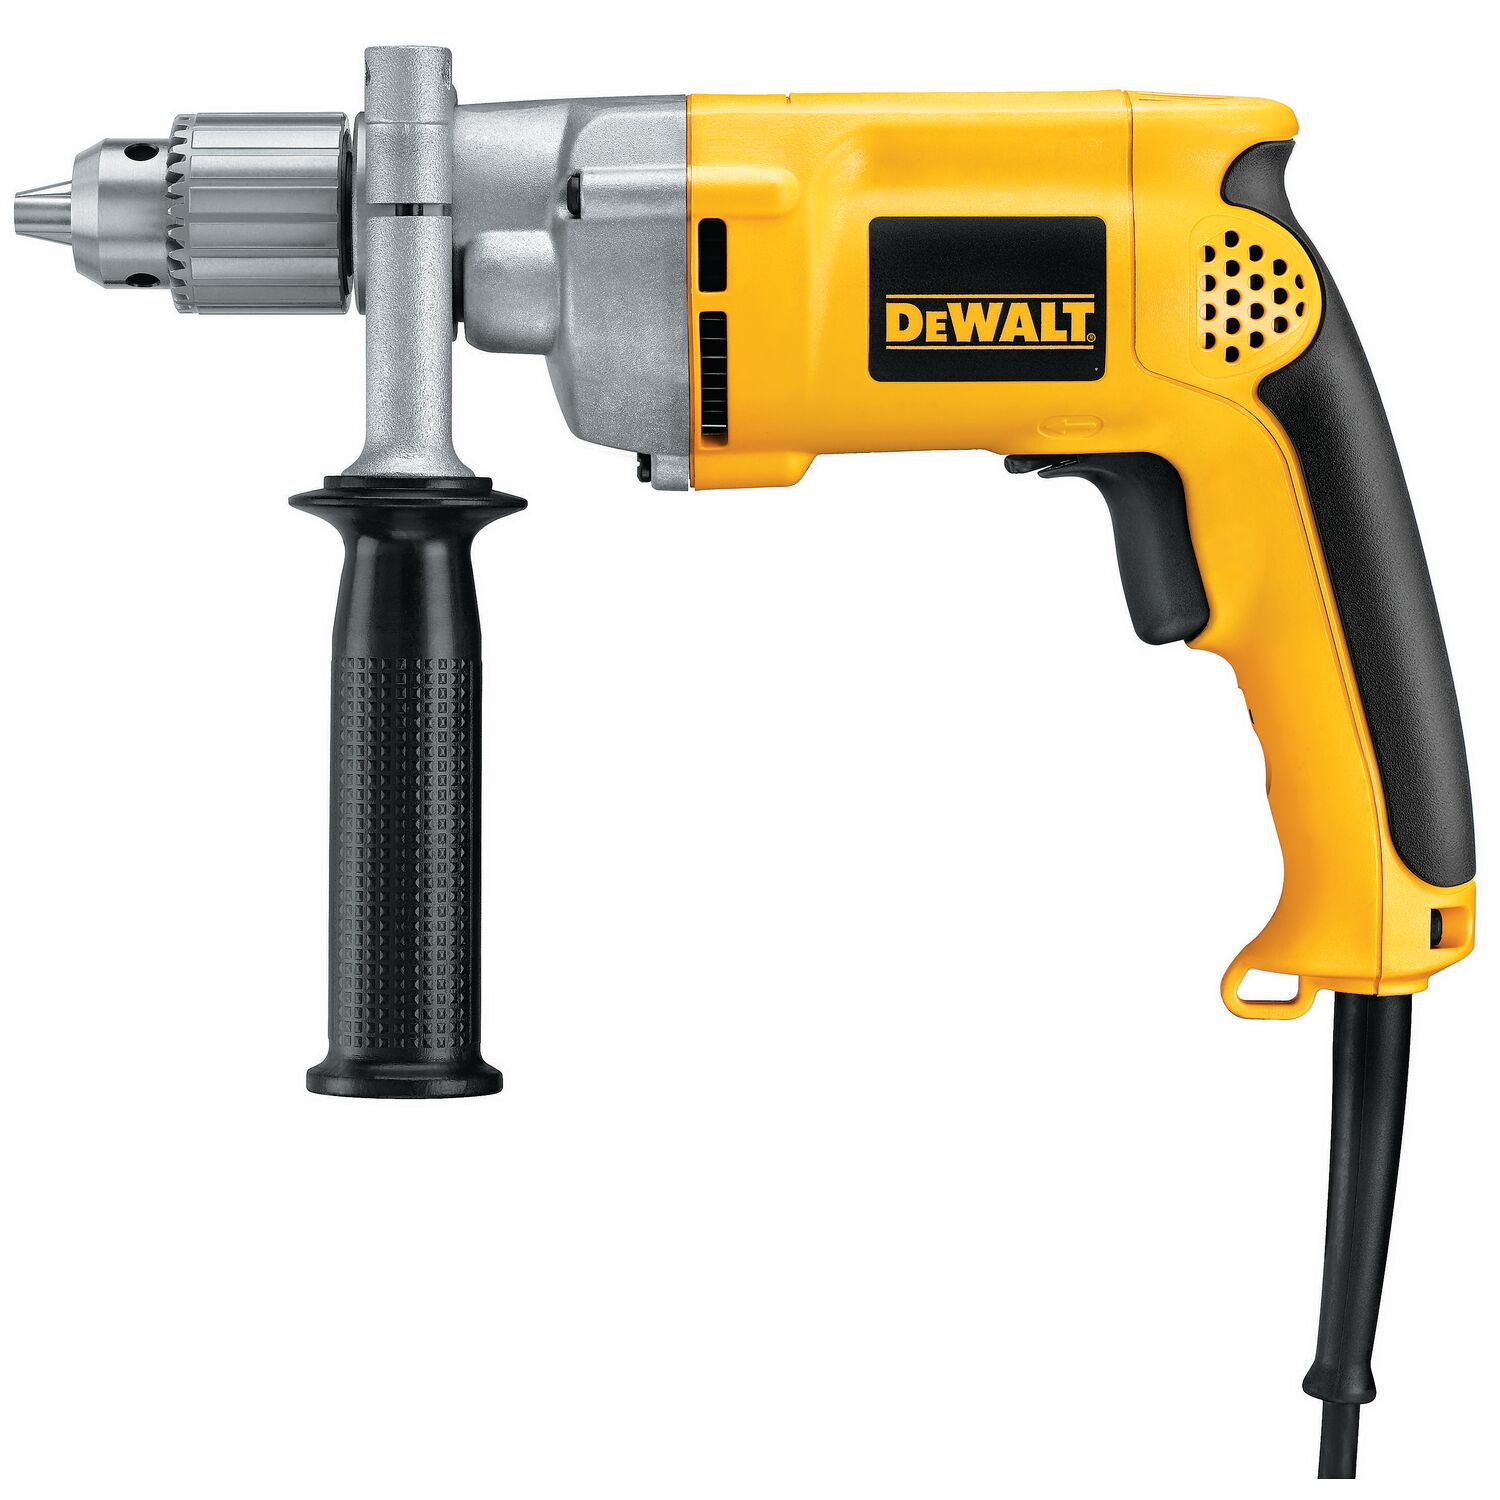 DEWALT 1/2-in Keyed Corded Drill in the Drills department at Lowes.com